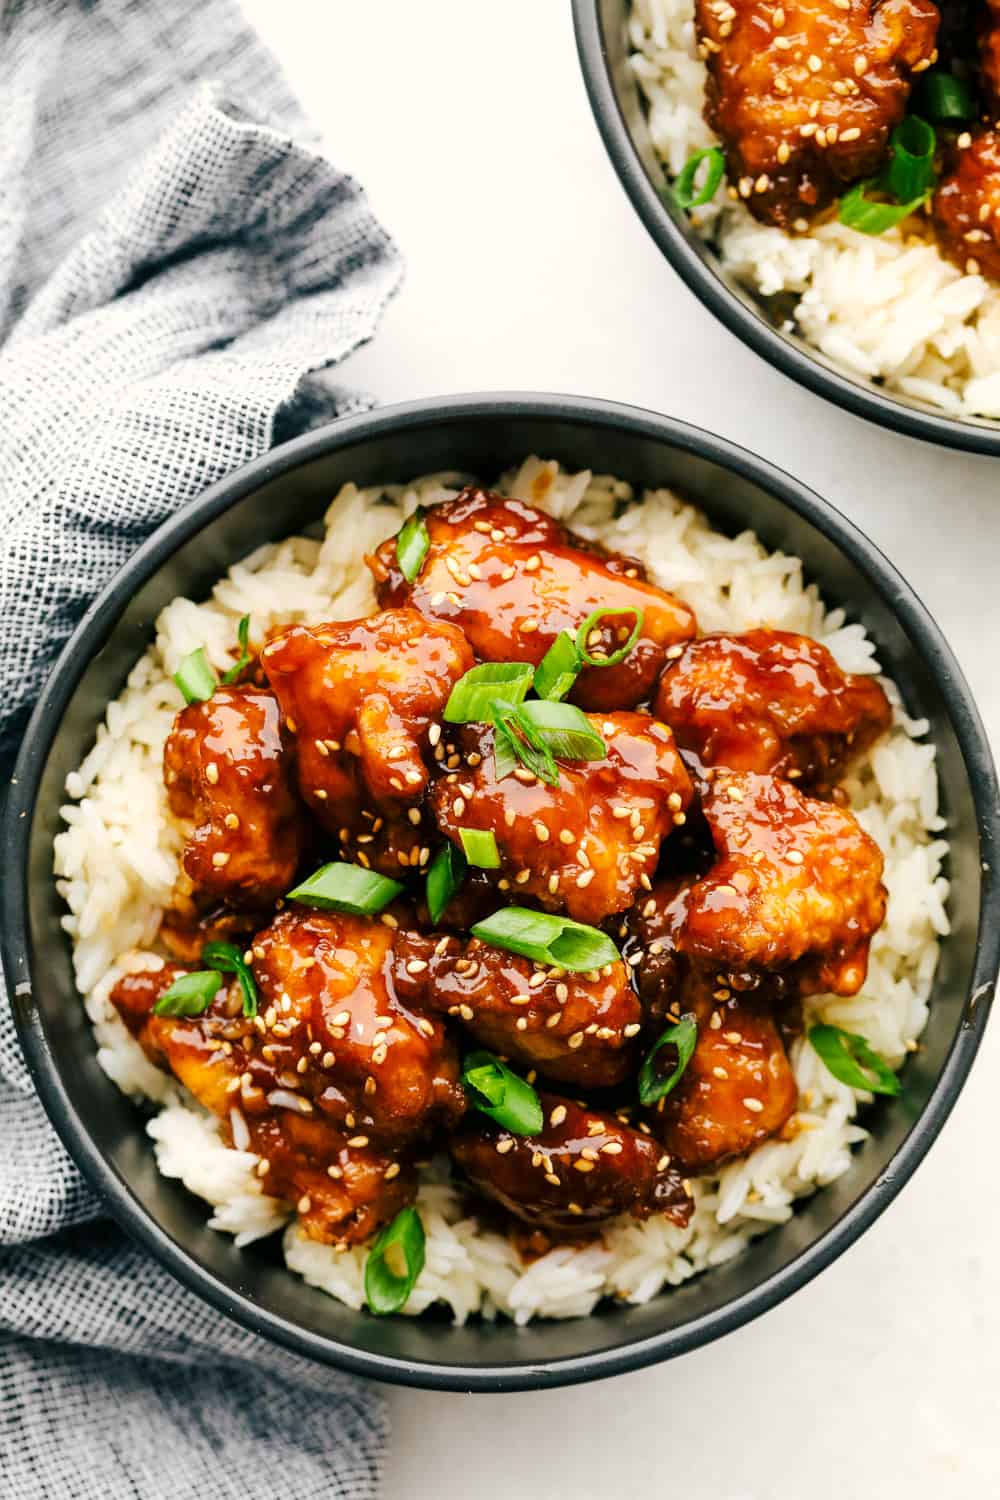 Honey baked chicken in a bed of rice. 